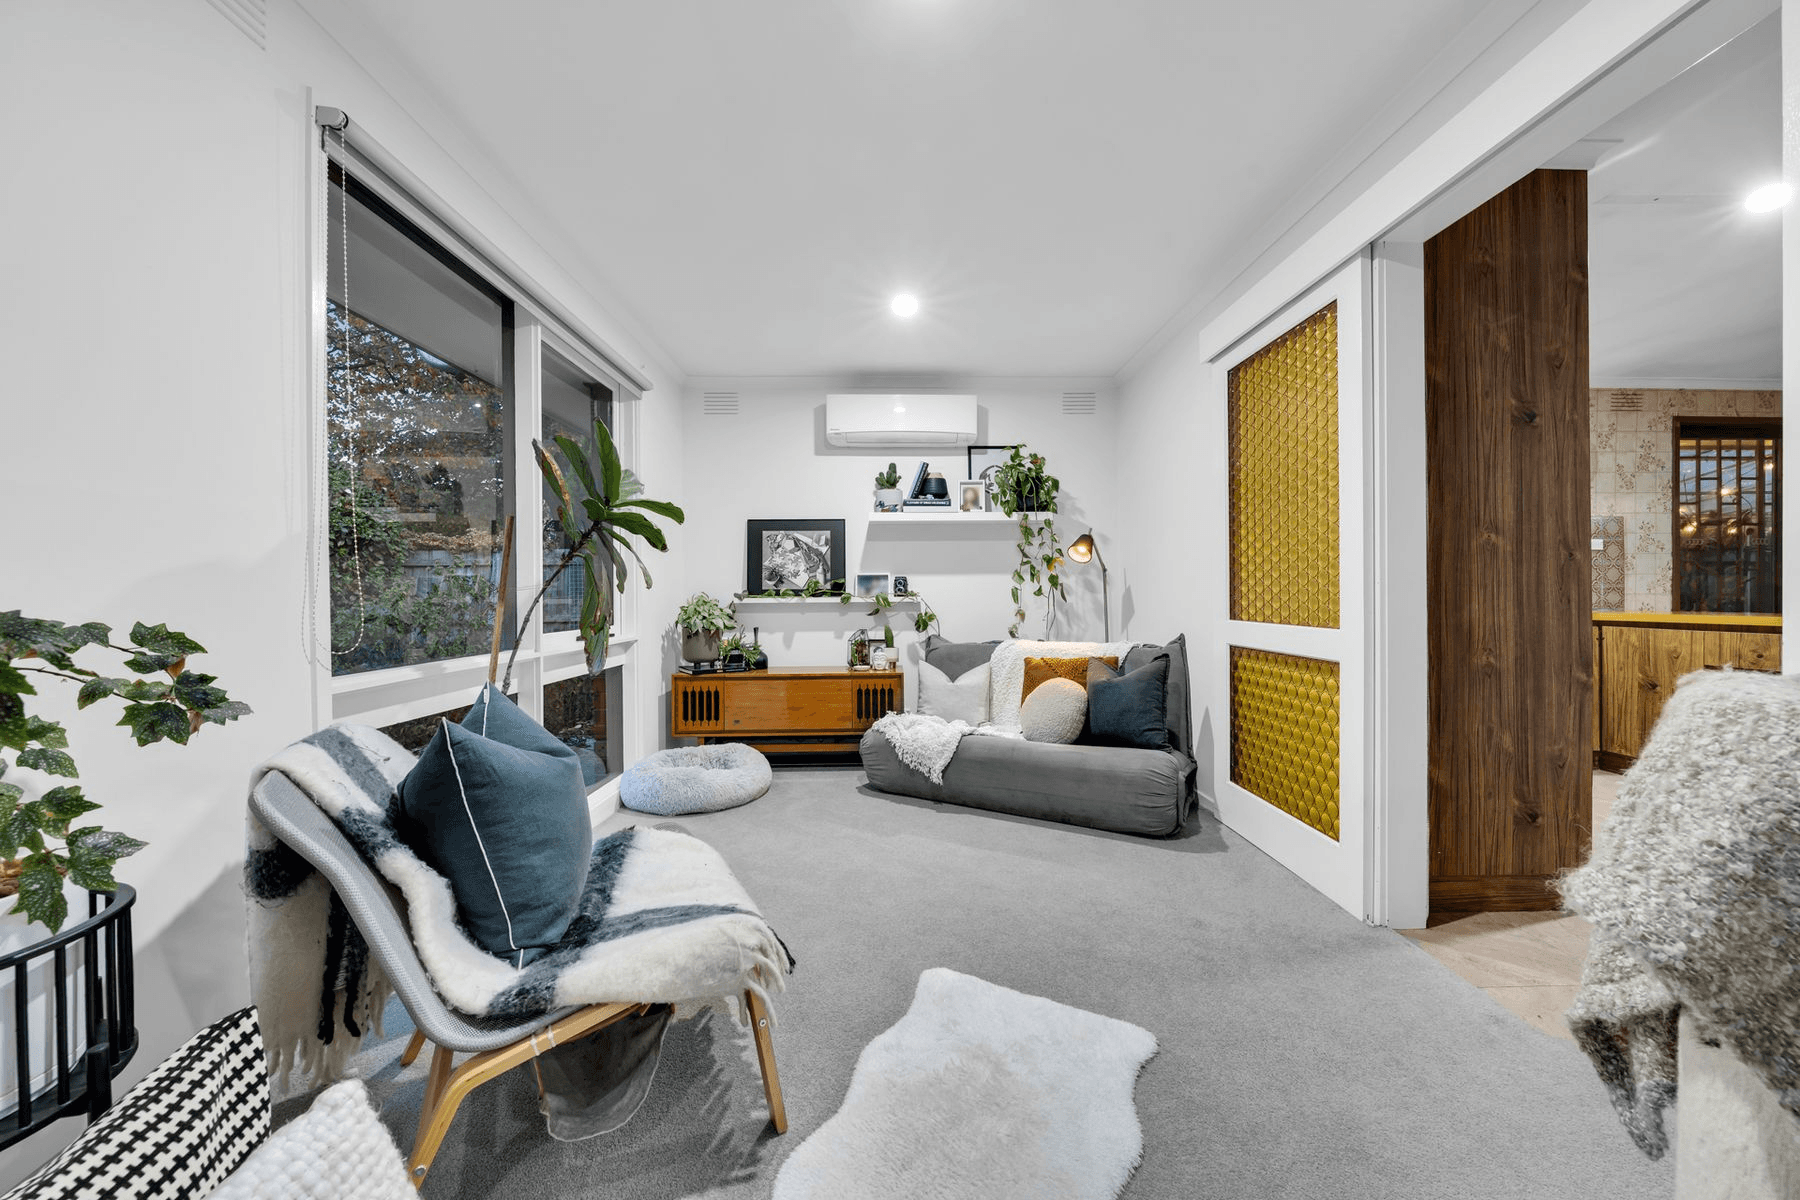 1/8 Olympic Avenue, SPRINGVALE SOUTH, VIC 3172